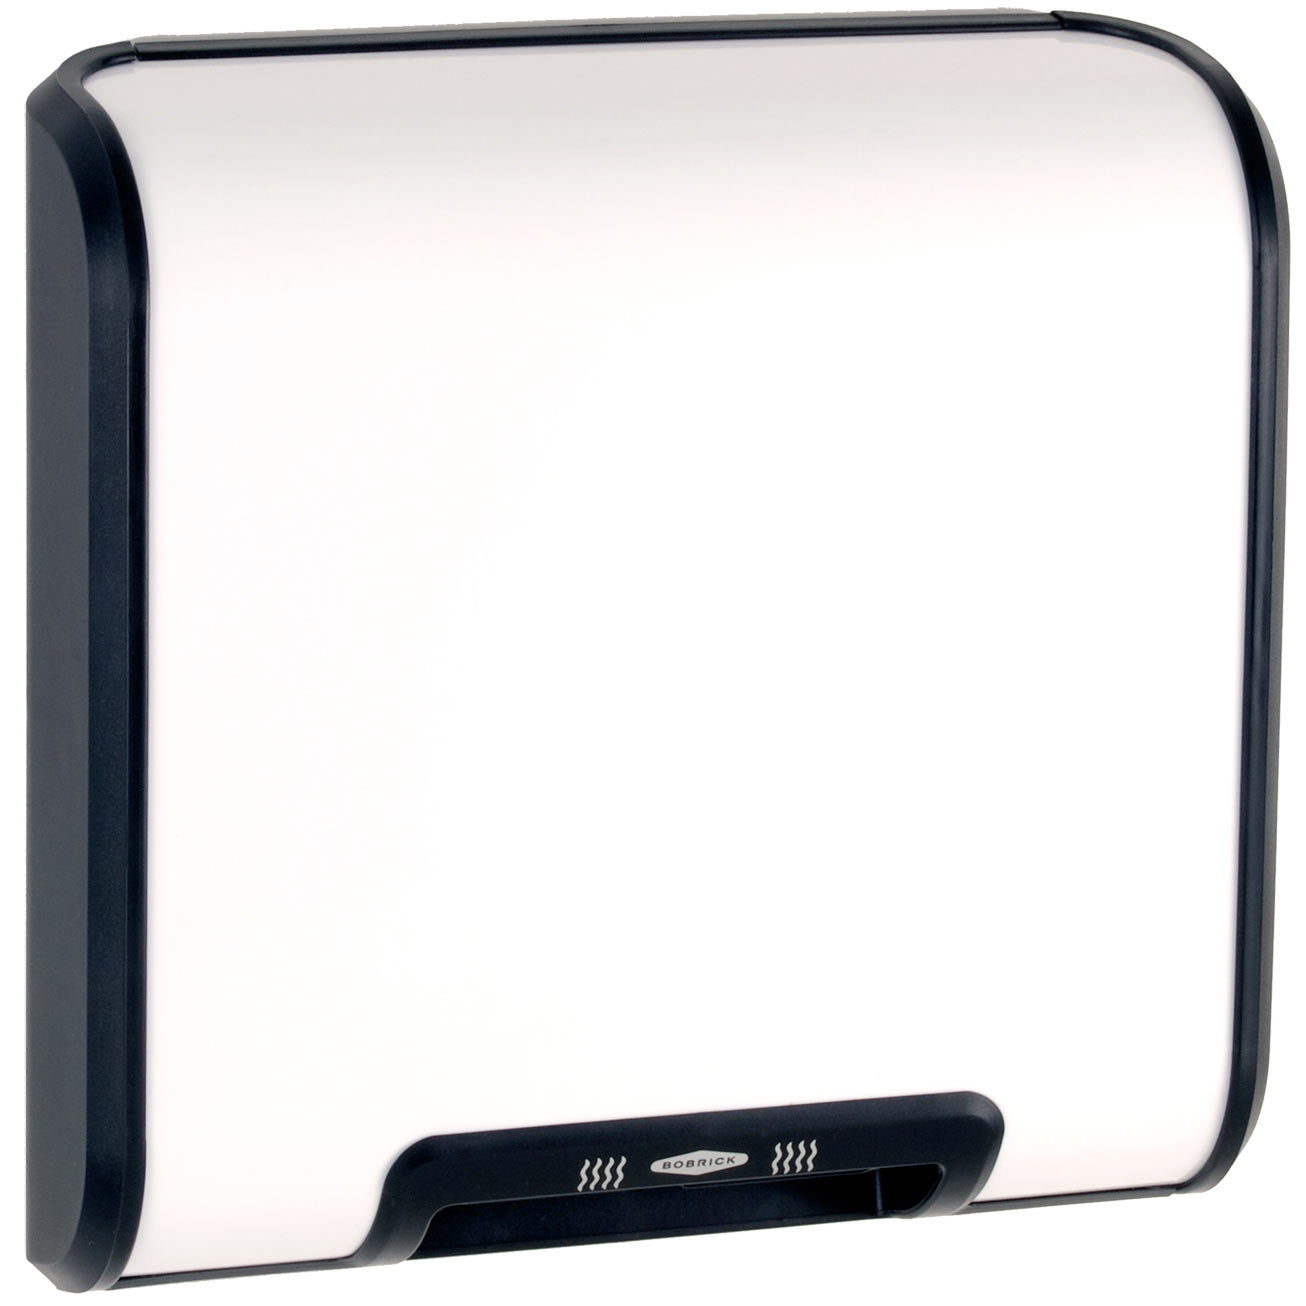 Bobrick B-7120 Automatic Hand Dryer, 230 Volt, Surface-Mounted, White Painted Cover